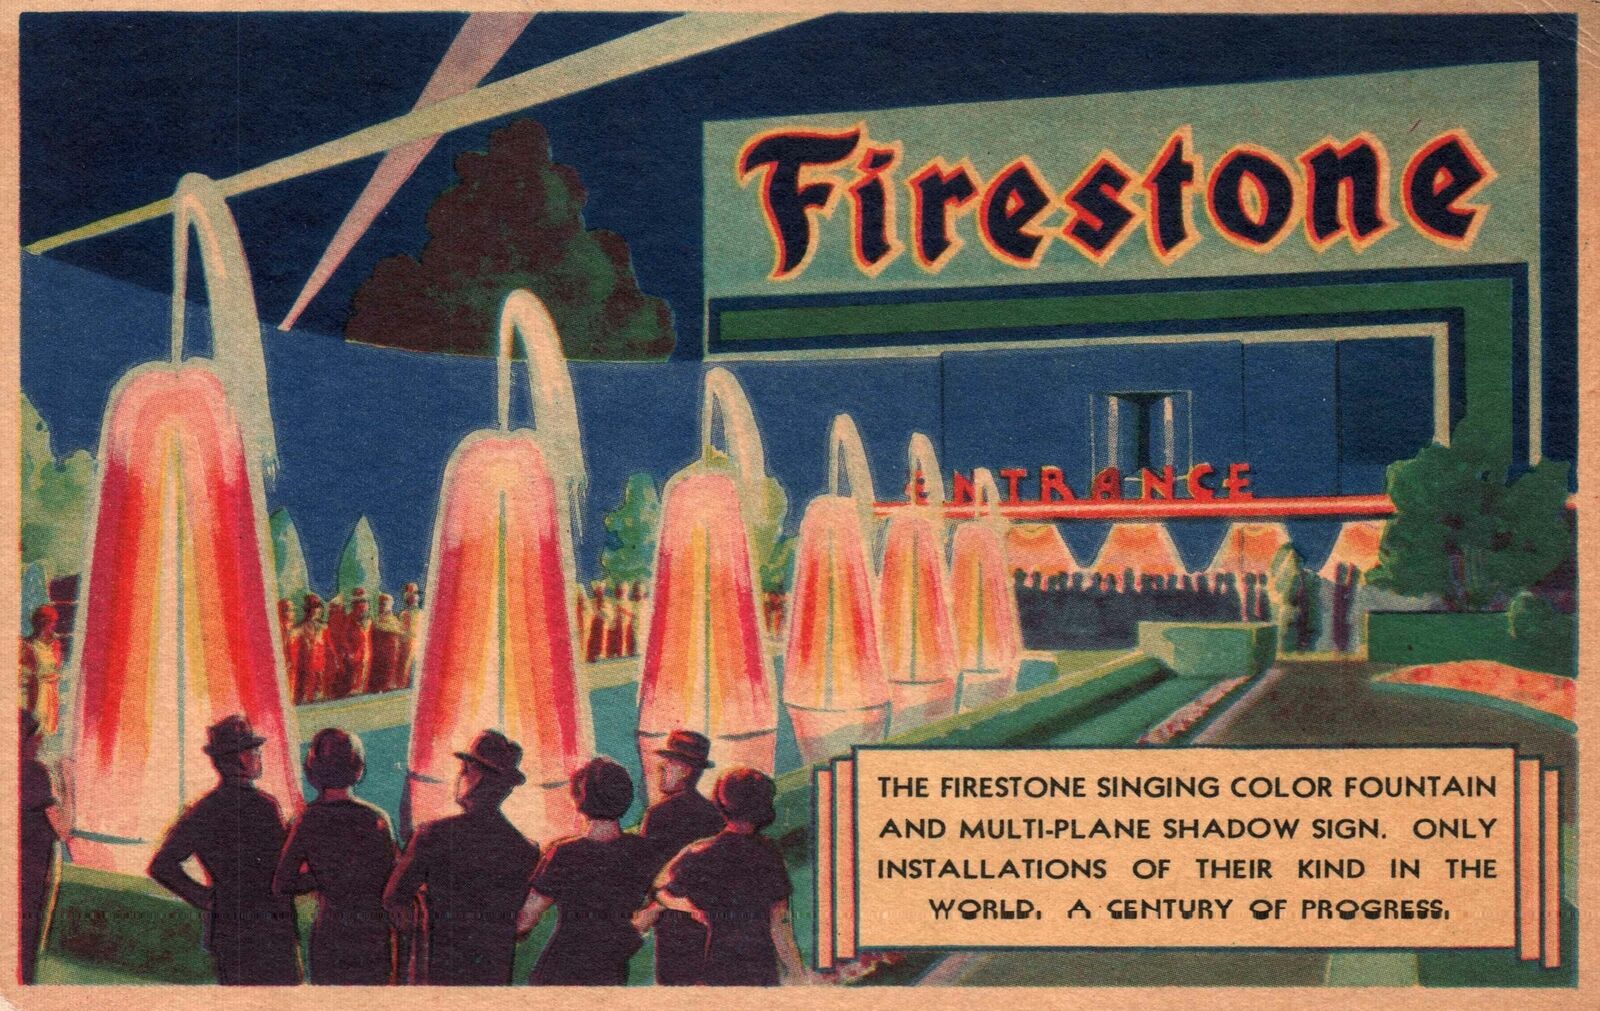 VINTAGE POSTCARD ADVERTISING FIRESTONE TIRE & RUBBER CO. SINGING FOUNTAIN 1933